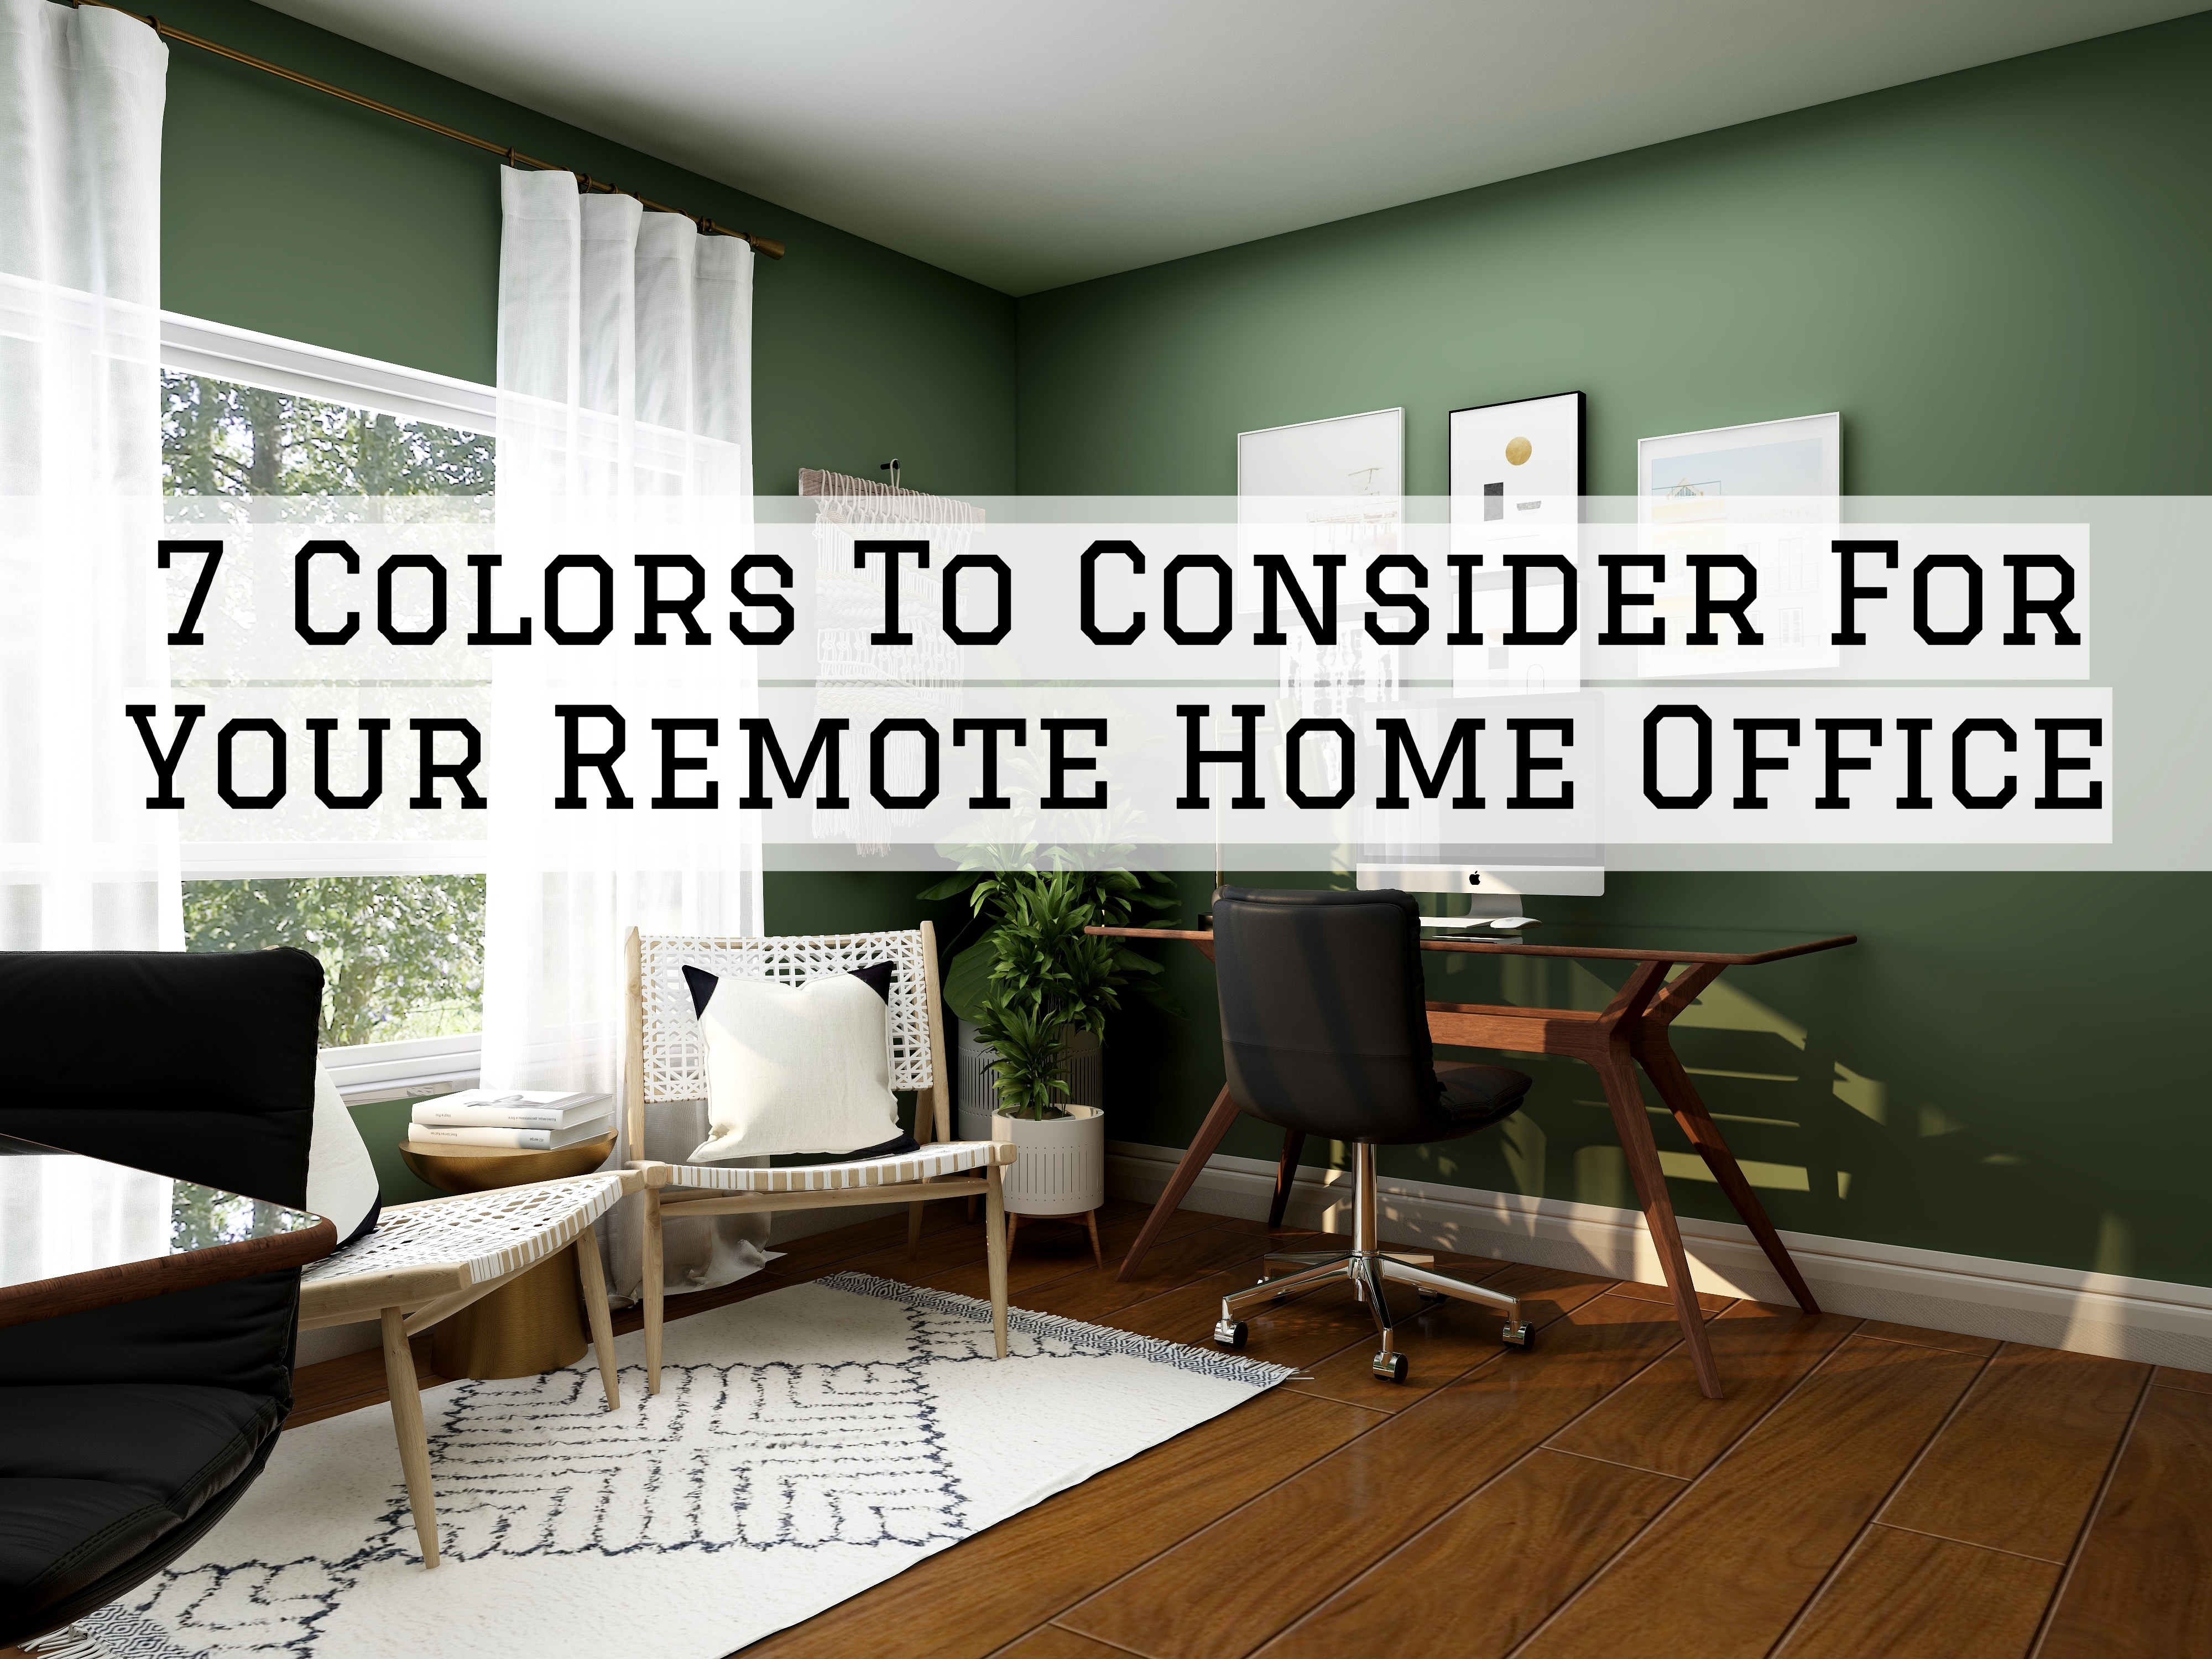 7 Colors To Consider For Your Remote Home Office in Ottawa, Ontario